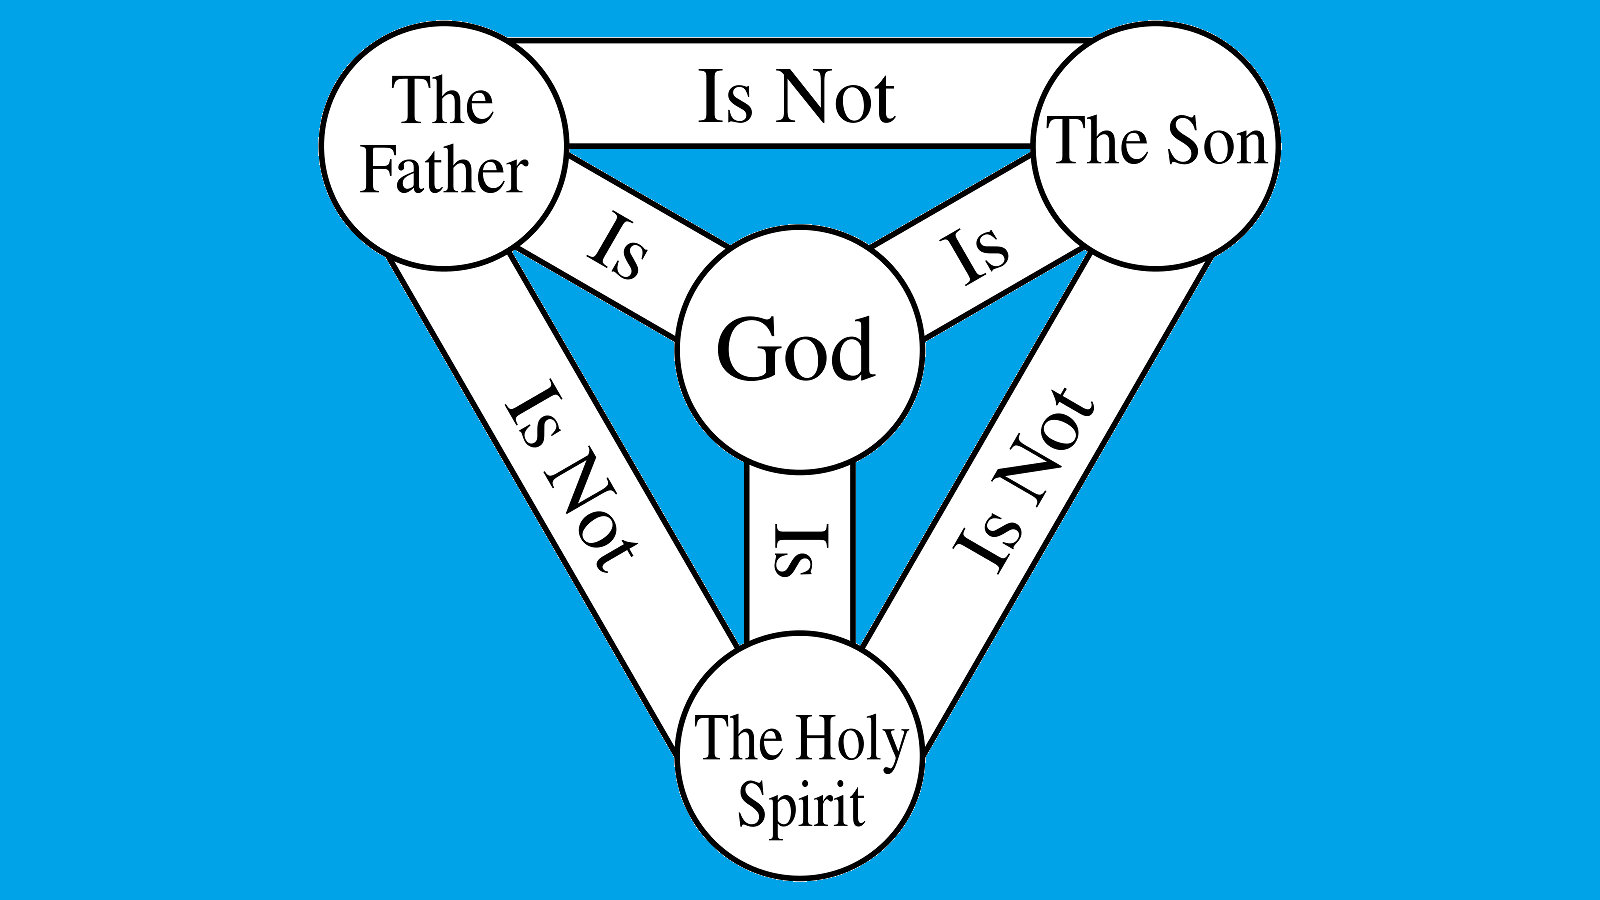 What about the Trinity?